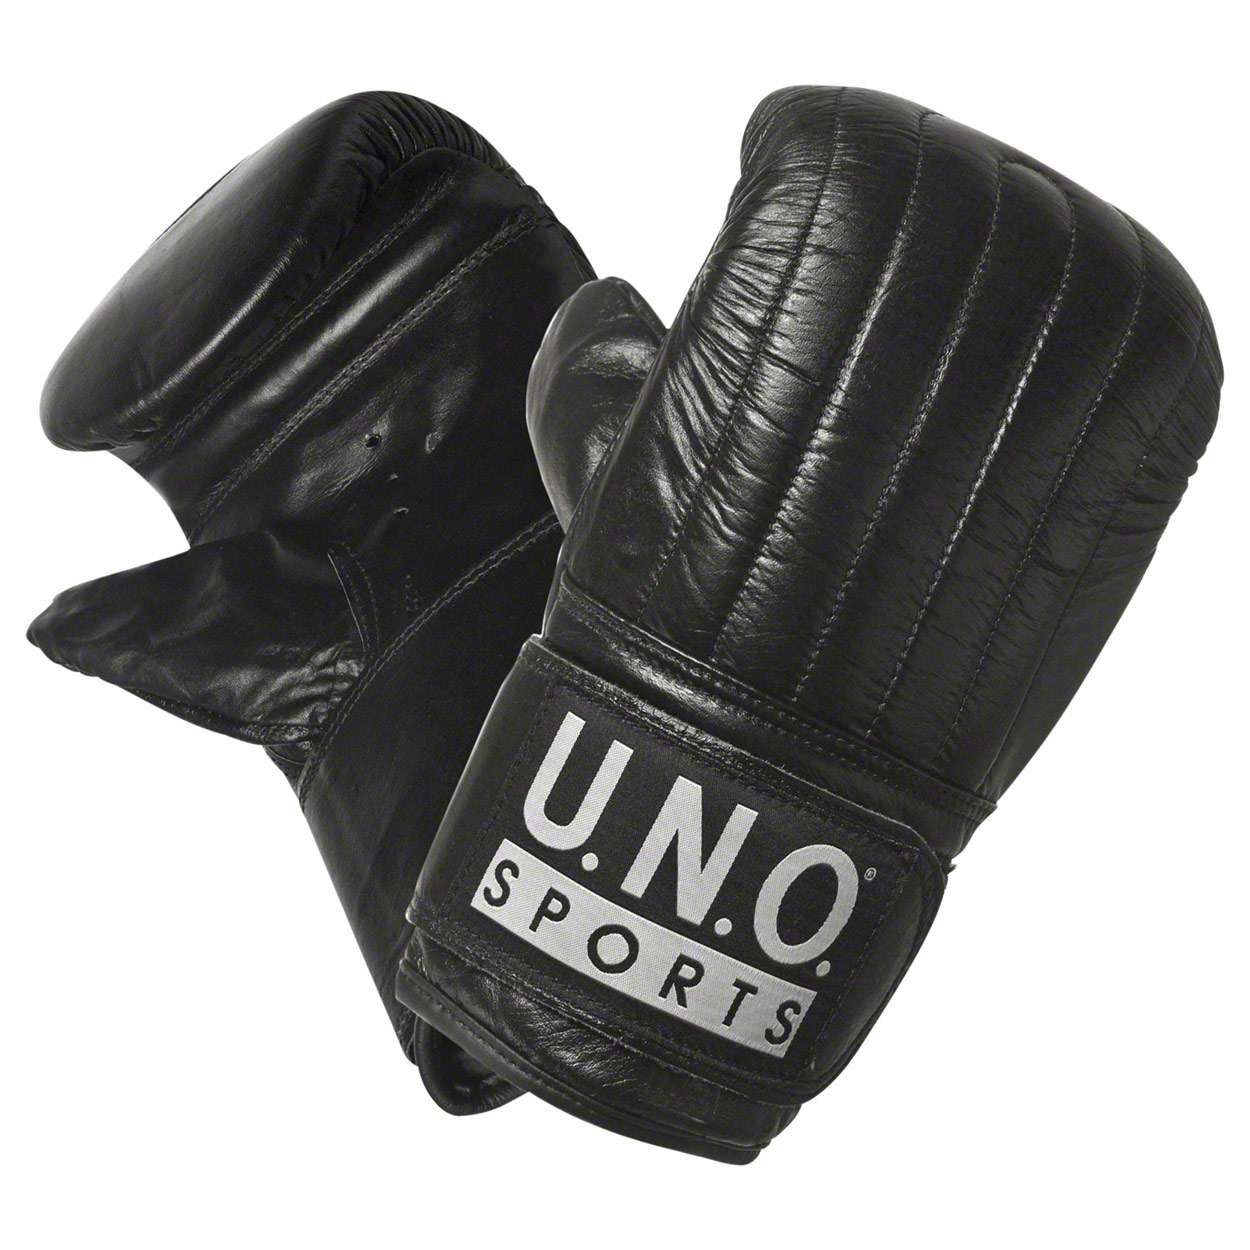 U.N.O. Sports fitness gloves Punch Pro, size XL, pair buy online | Sport-Tec